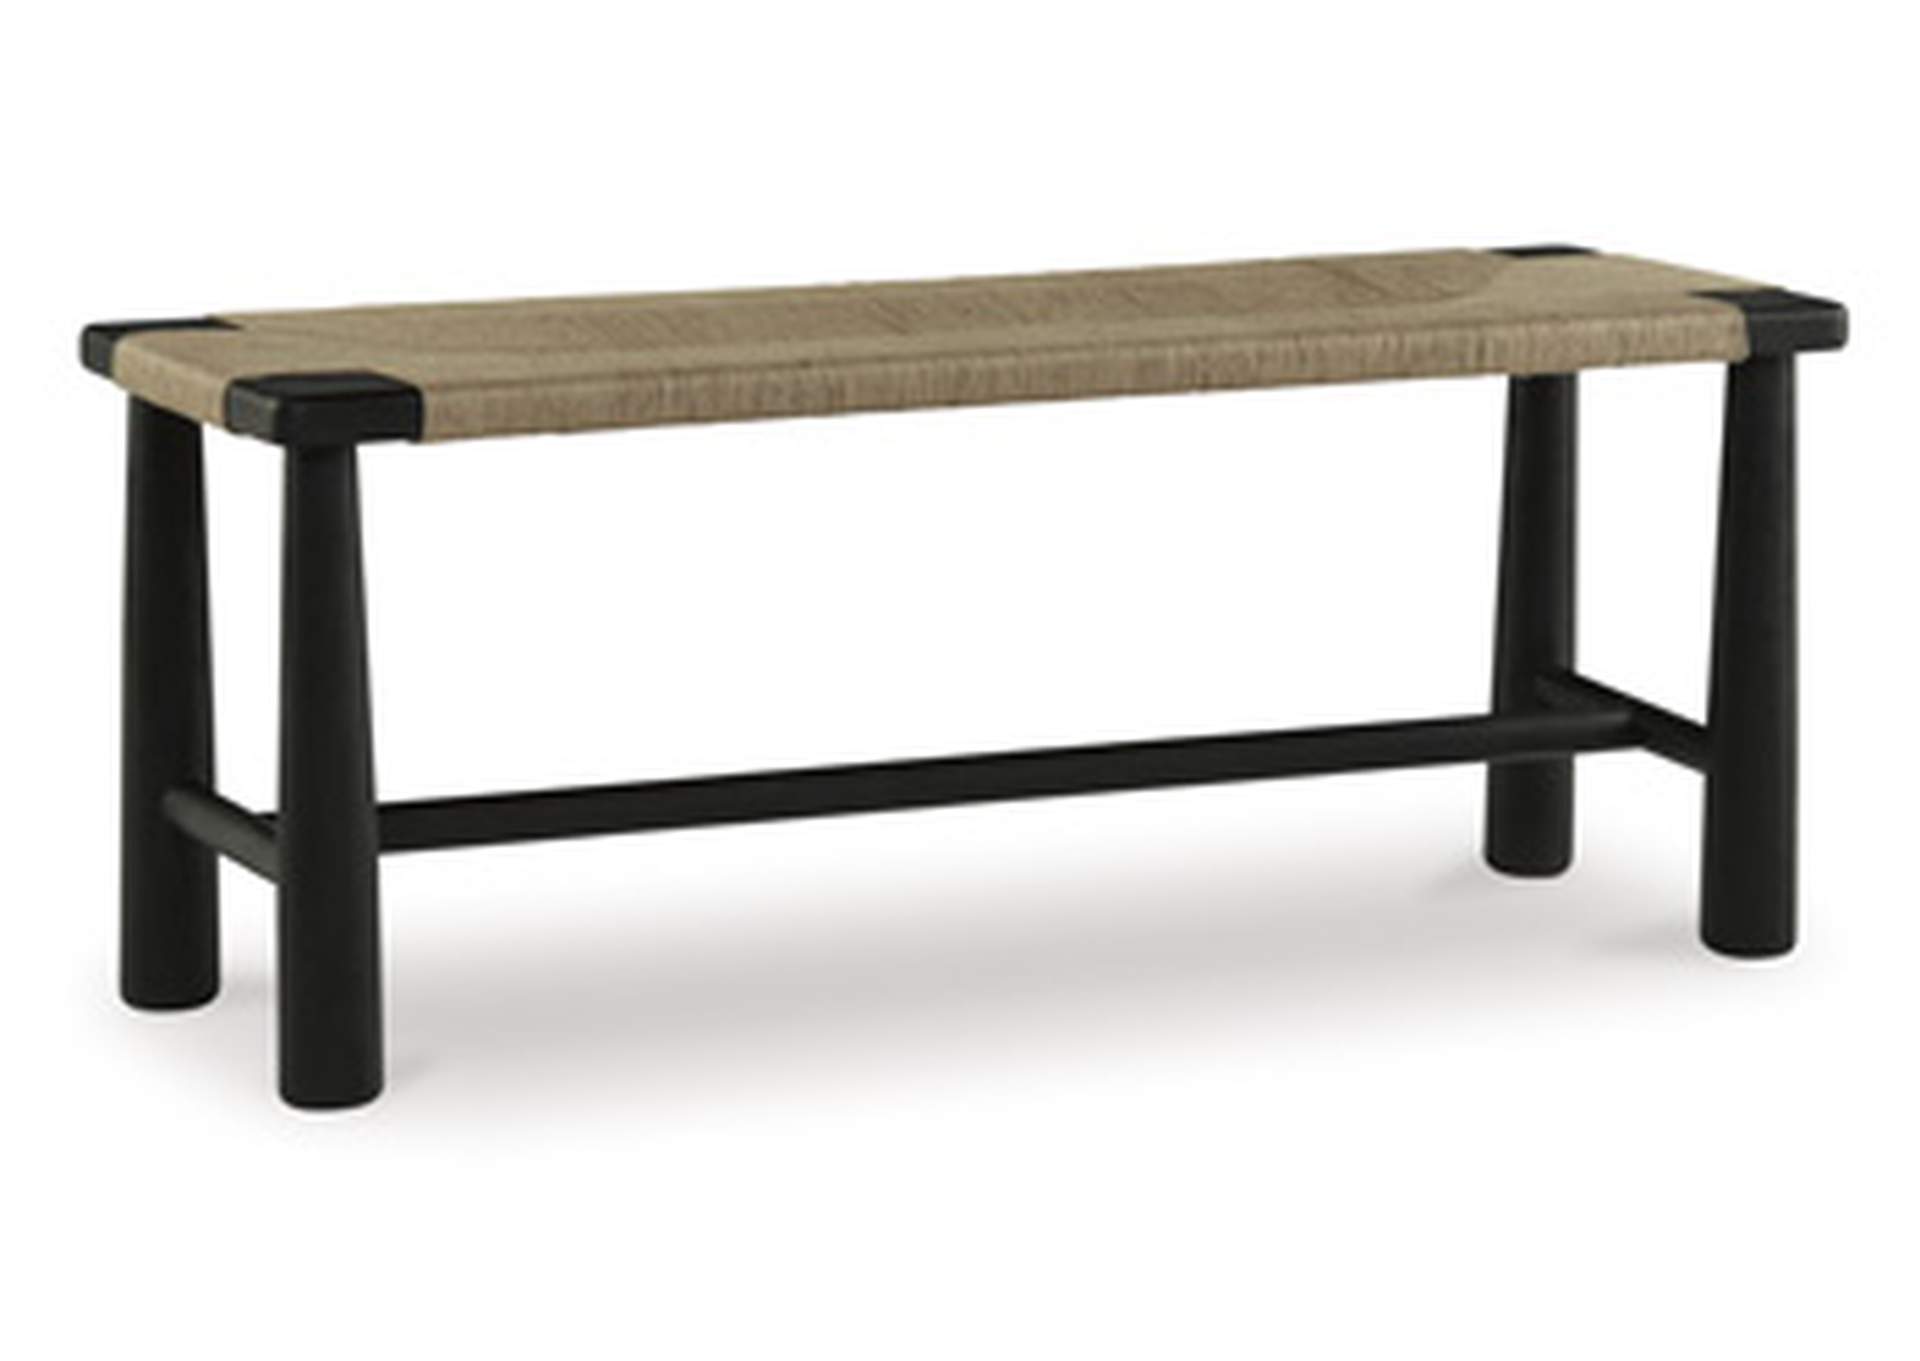 Acerman Accent Bench,Signature Design By Ashley